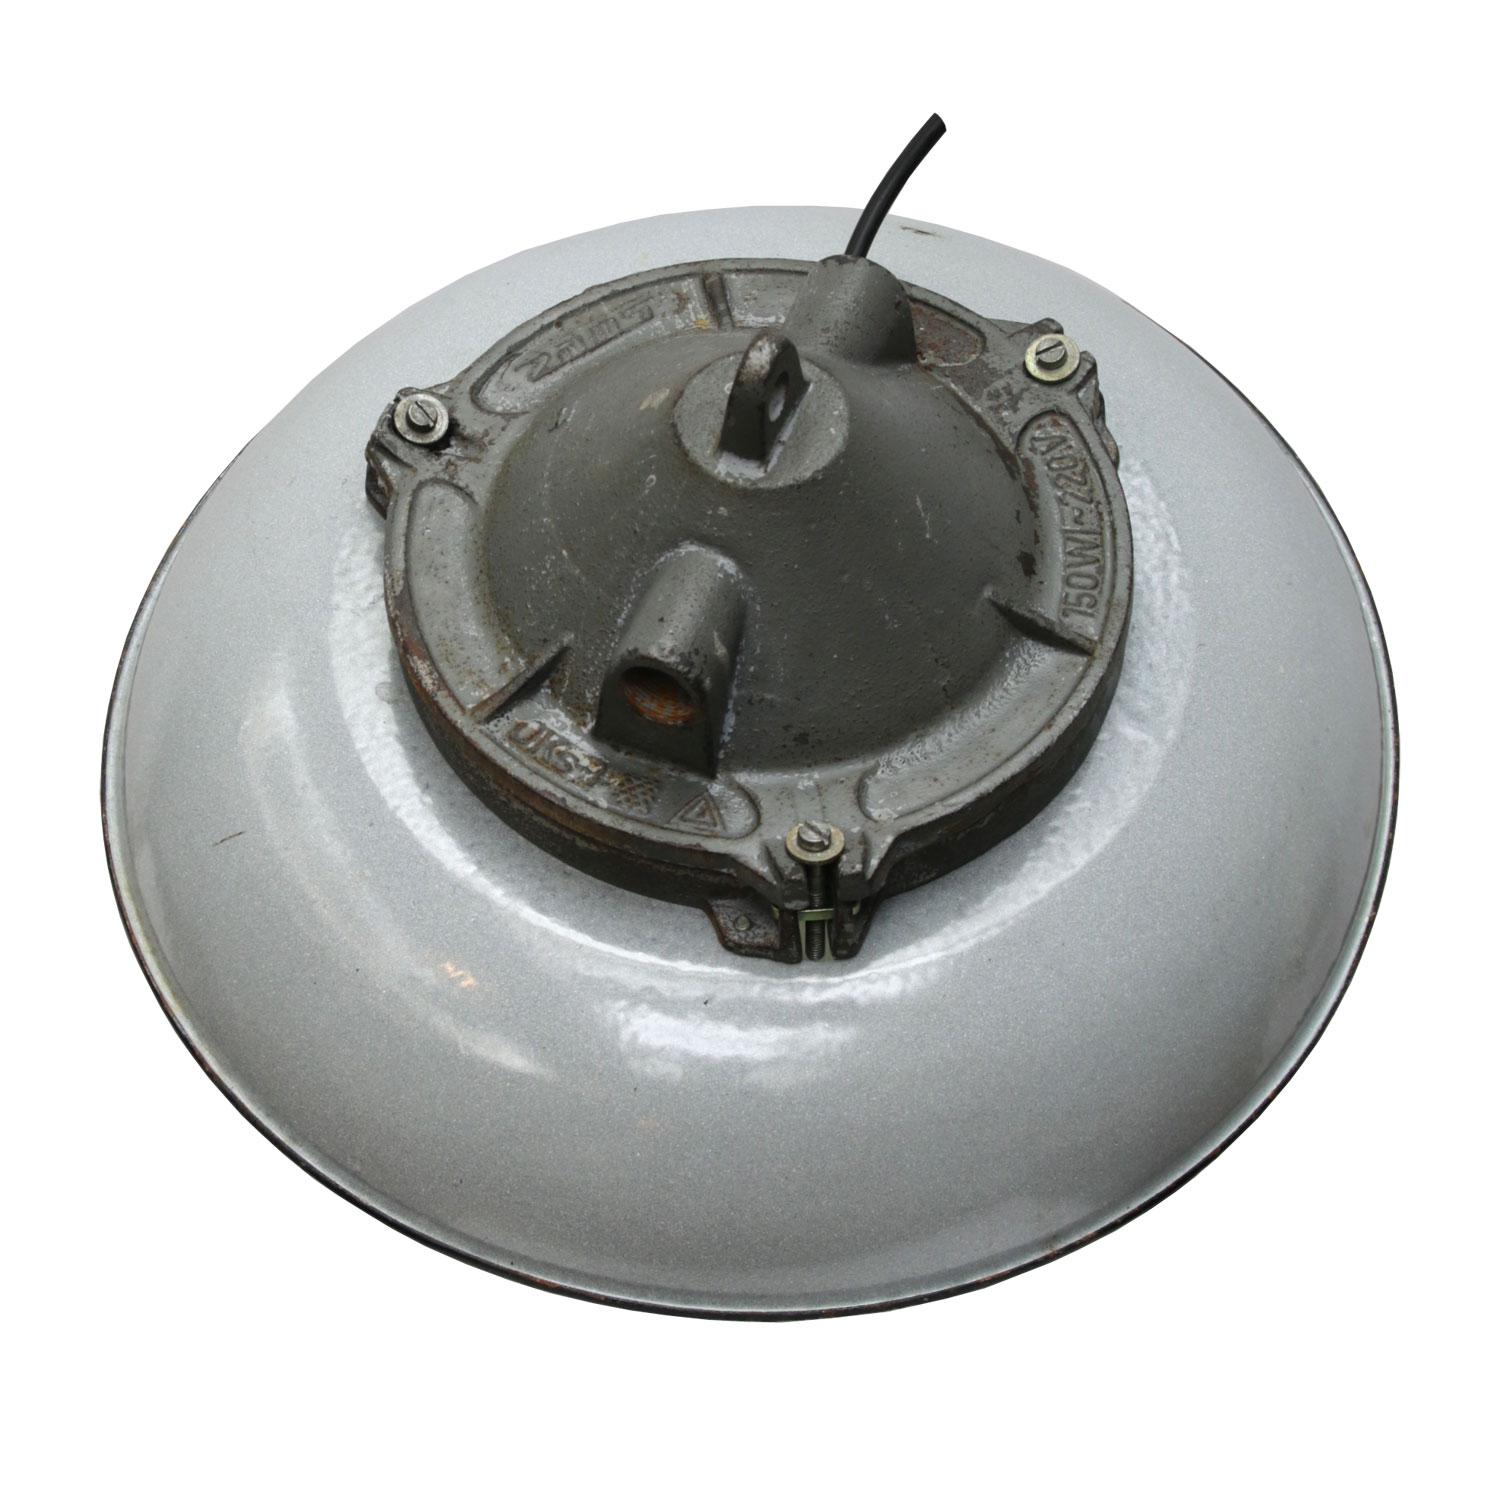 Industrial factory pendant. Grey enamel shade. Cast iron top. Holophane glass.

Weight 6.0 kg / 13.2 lb. 

Priced per individual item. All lamps have been made suitable by international standards for incandescent light bulbs, energy-efficient